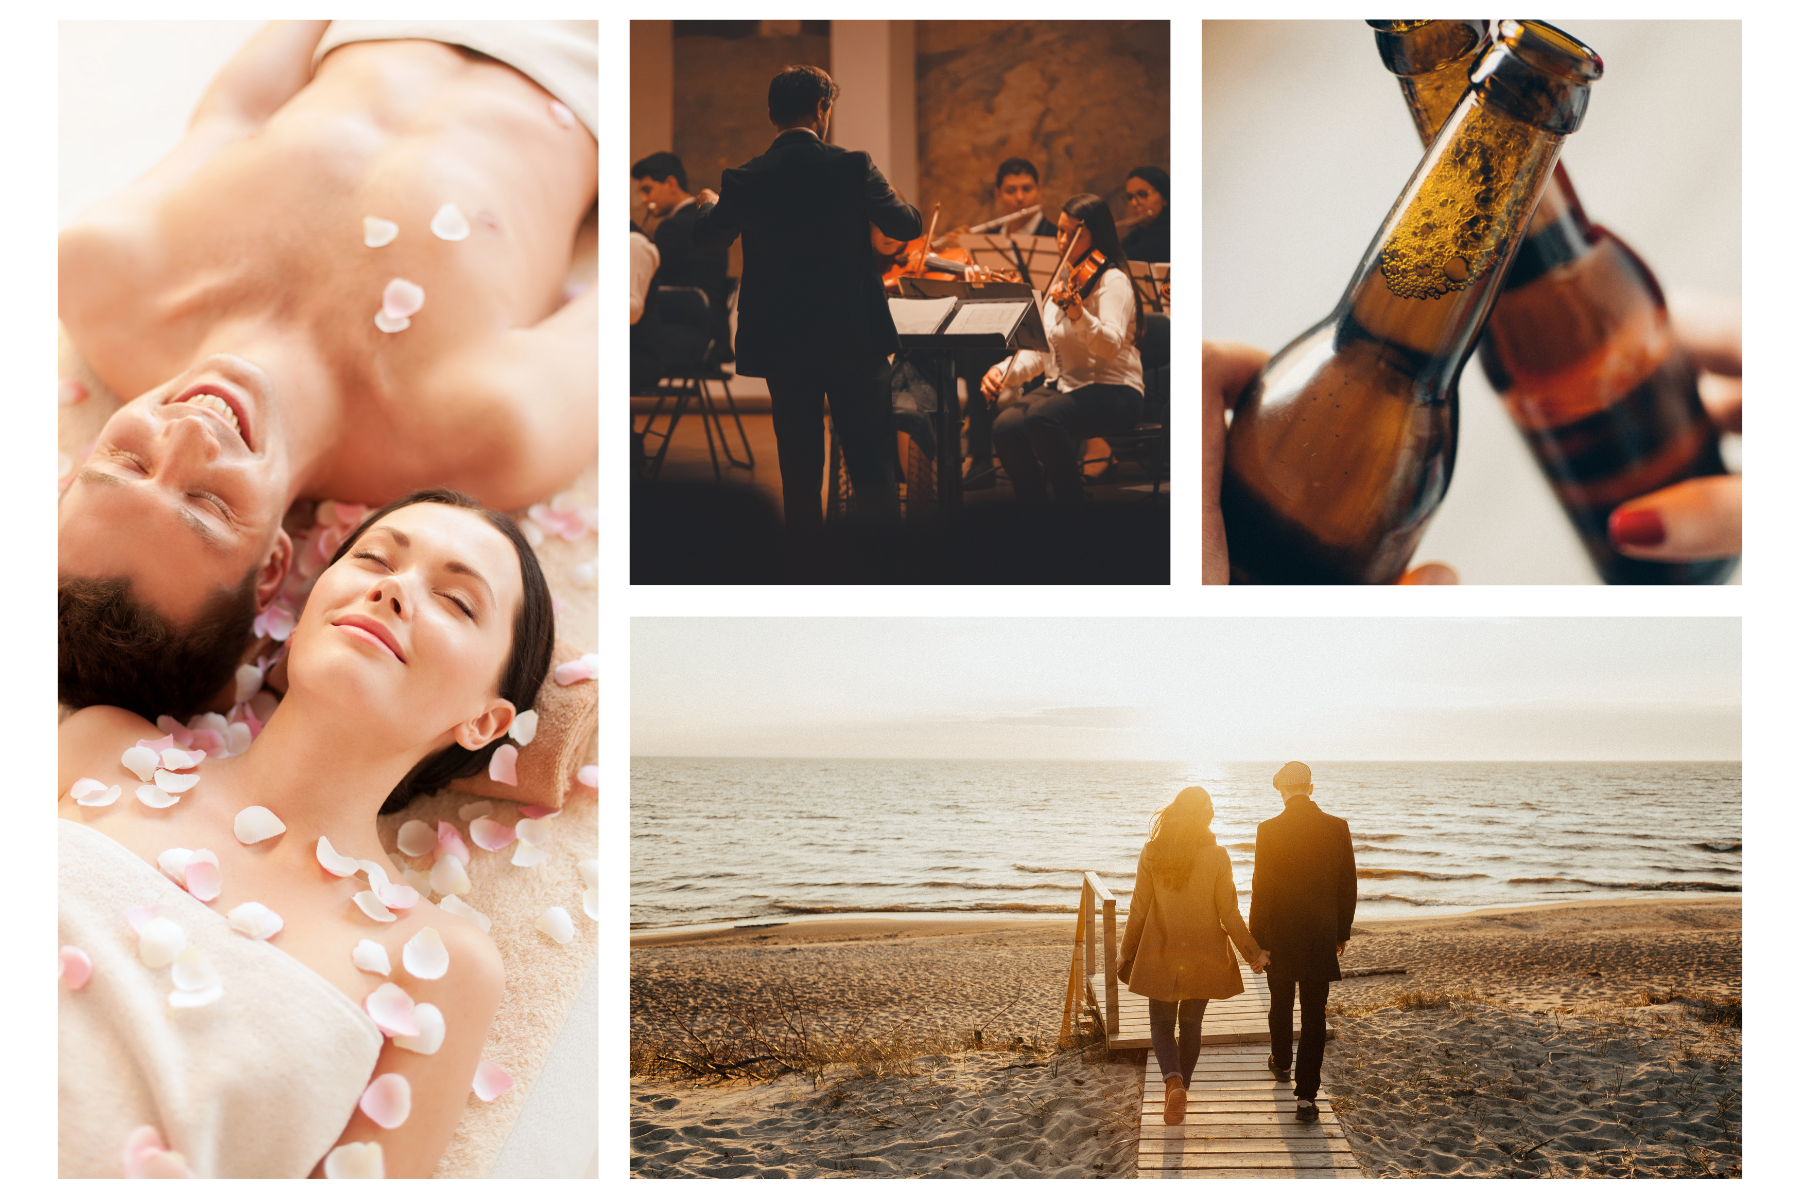 A collage of images: a couple at a spa, an orchestra on stage, glass beer bottles clinking, and a couple holding hands on the beach at sunset